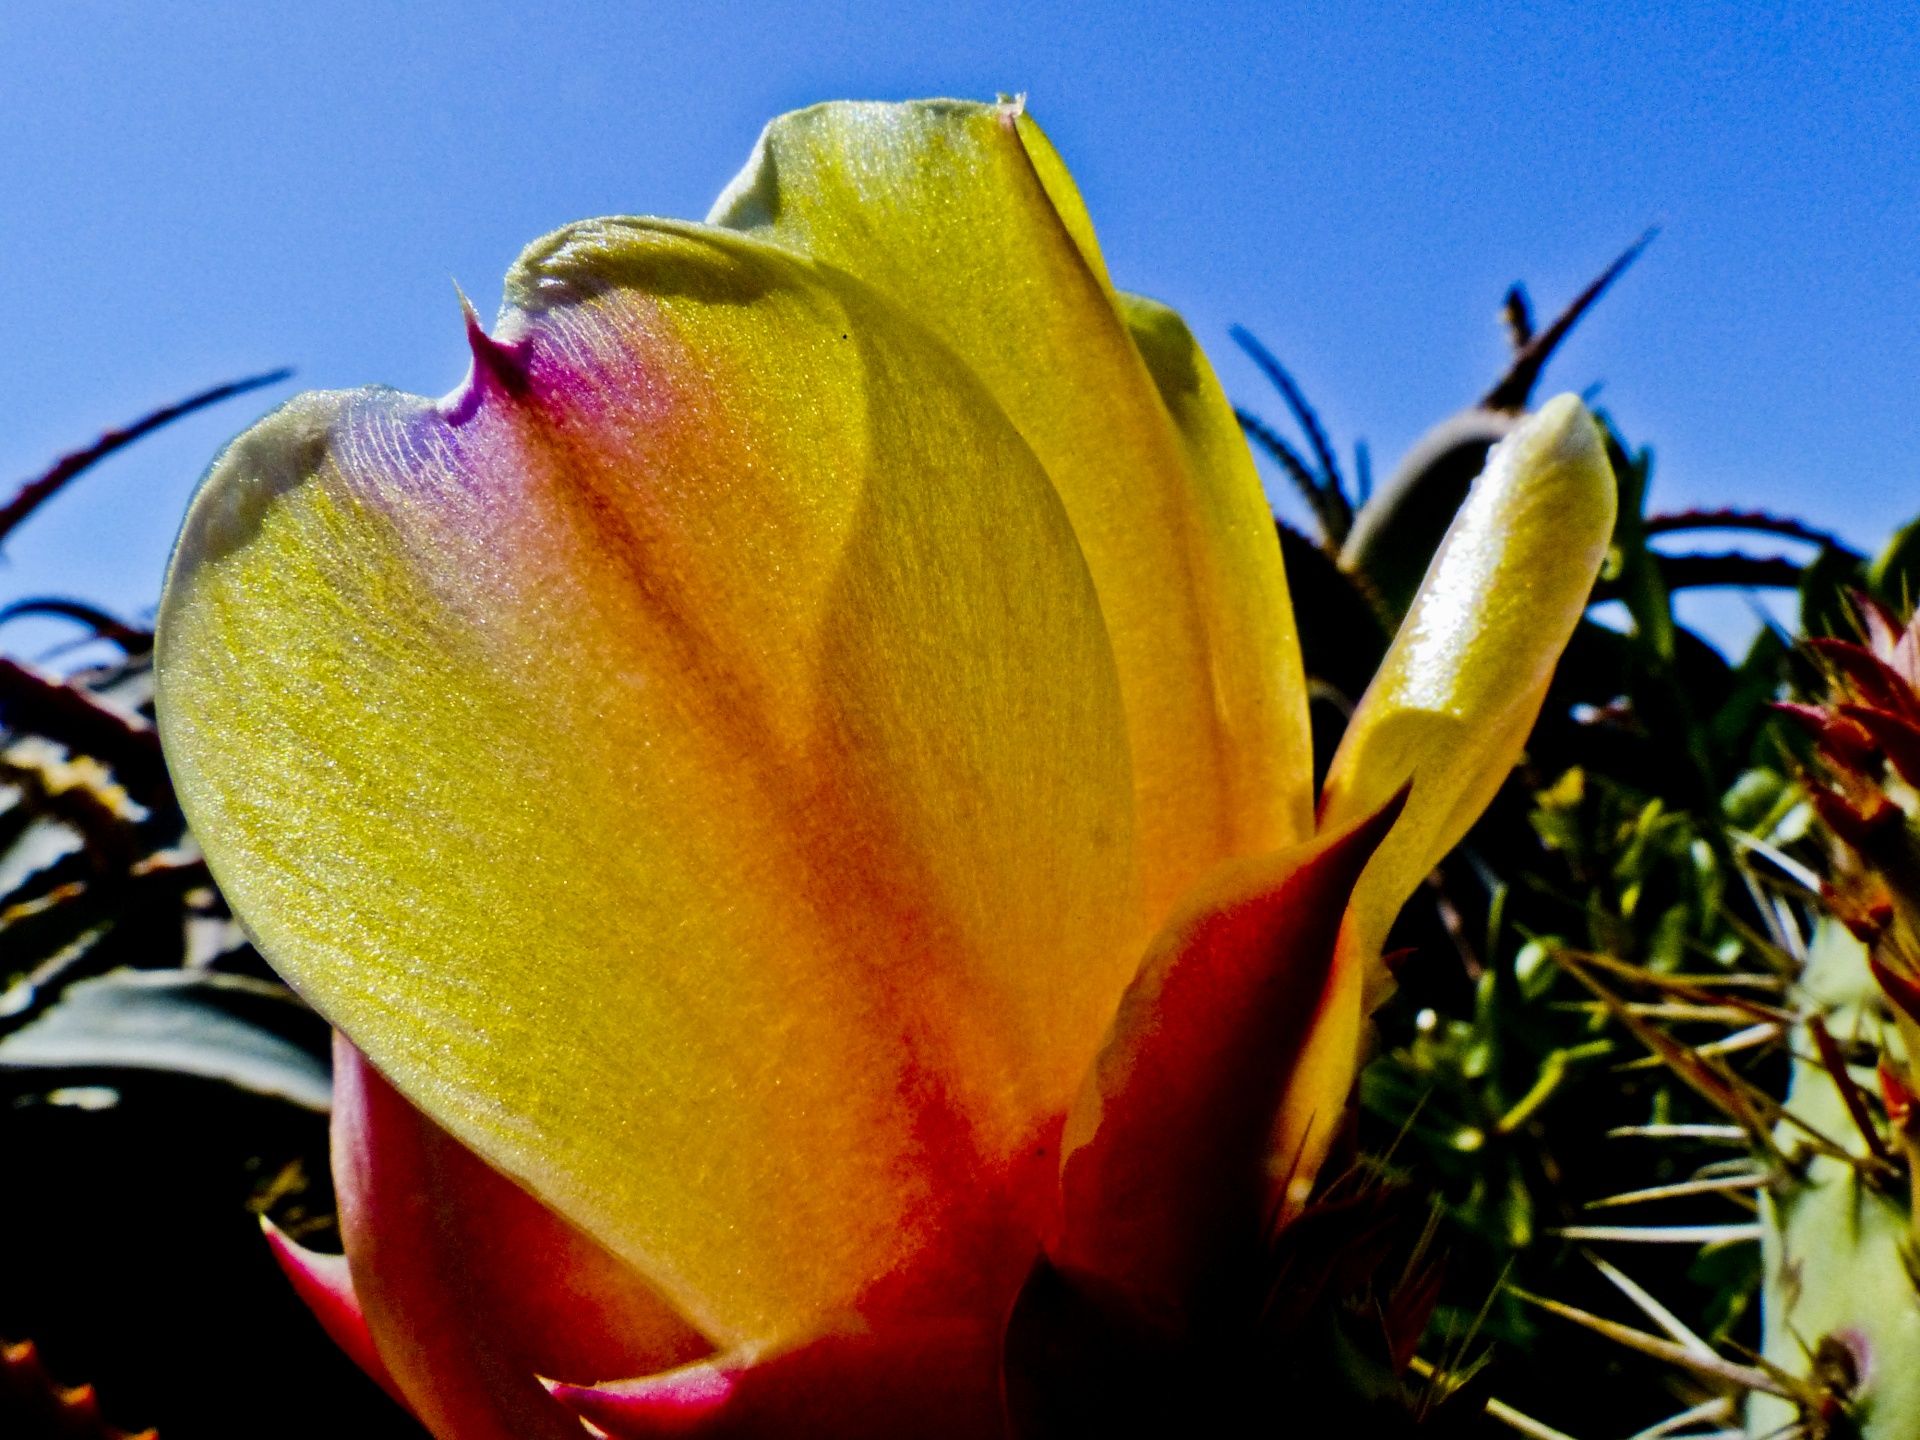 Yellow Prickly pear flower with the light adding glow to the petals against a blue sky